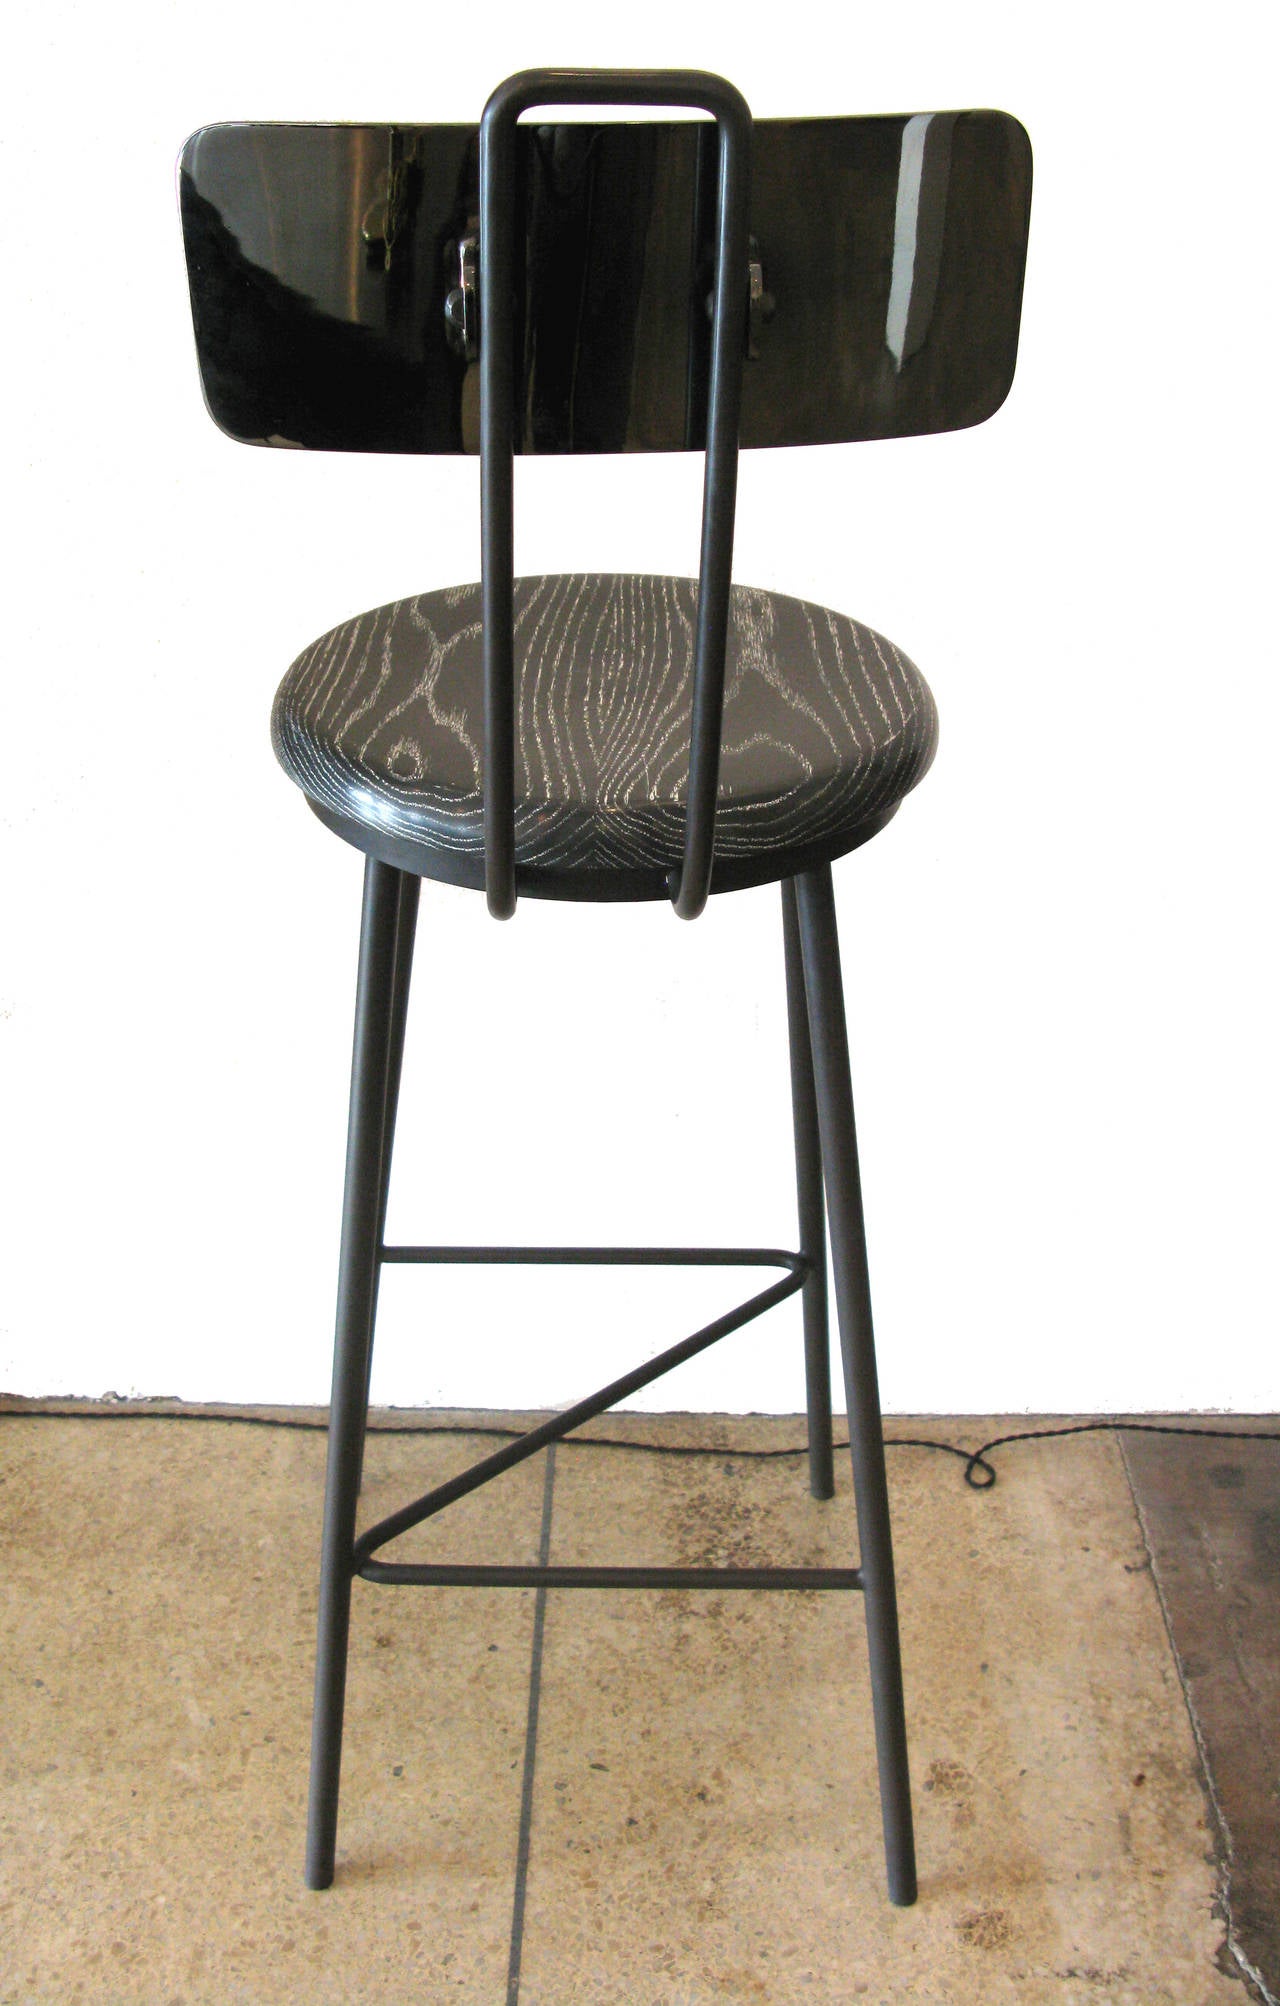 Contemporary Z Stool, Black Nickel and Cerused Oak (Bar Height)